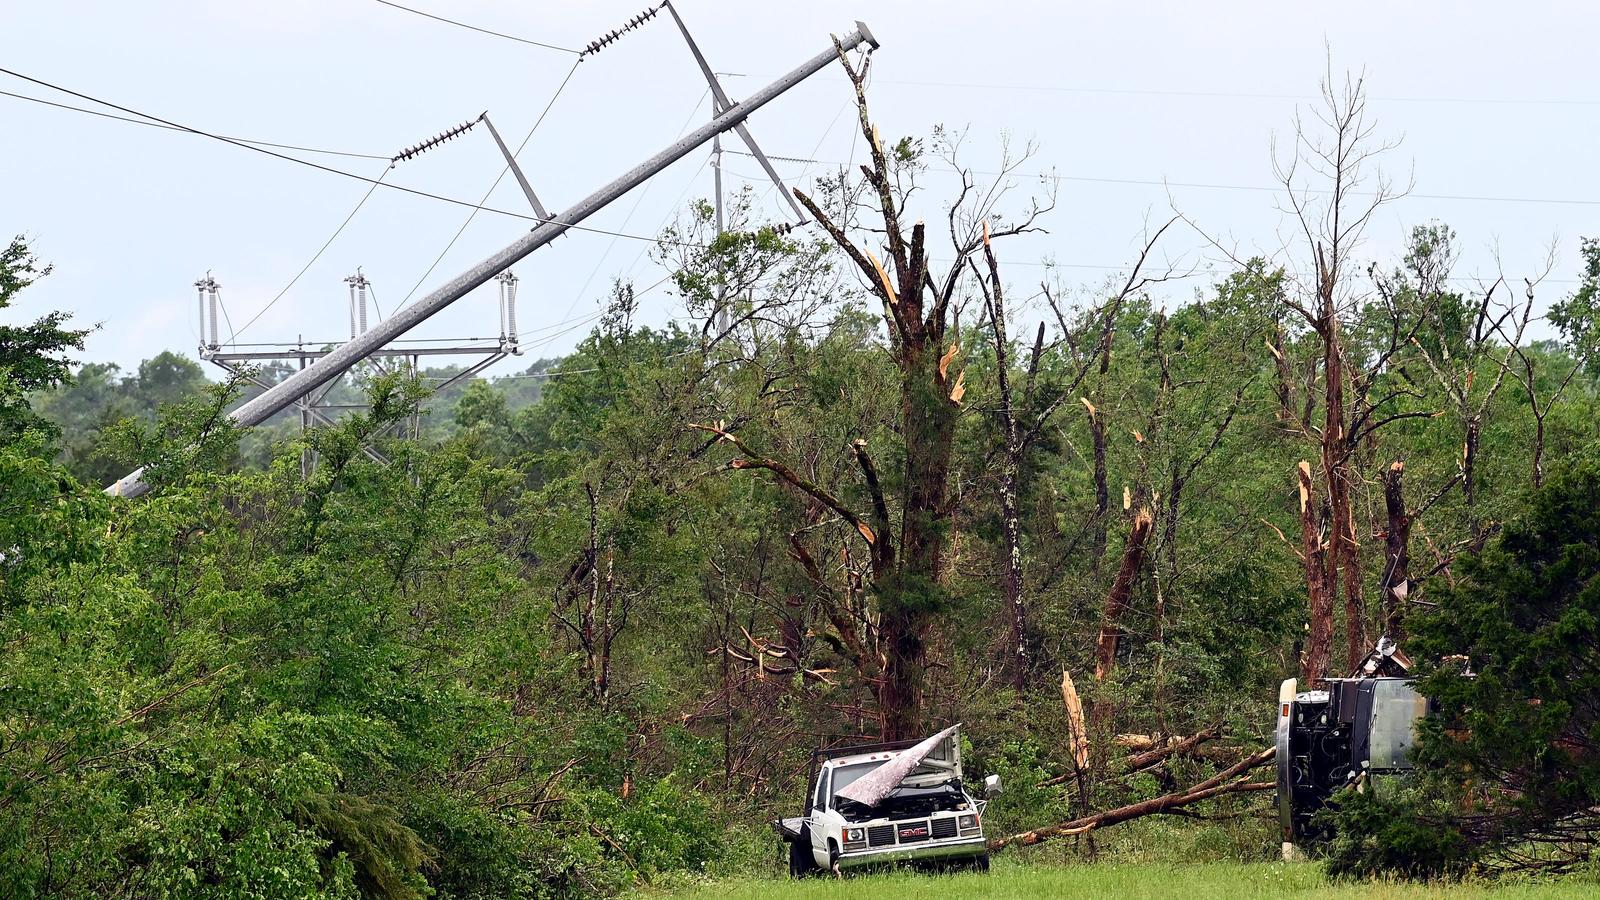 Governor Bill Lee is going to survey tornado damage in Middle Tennessee